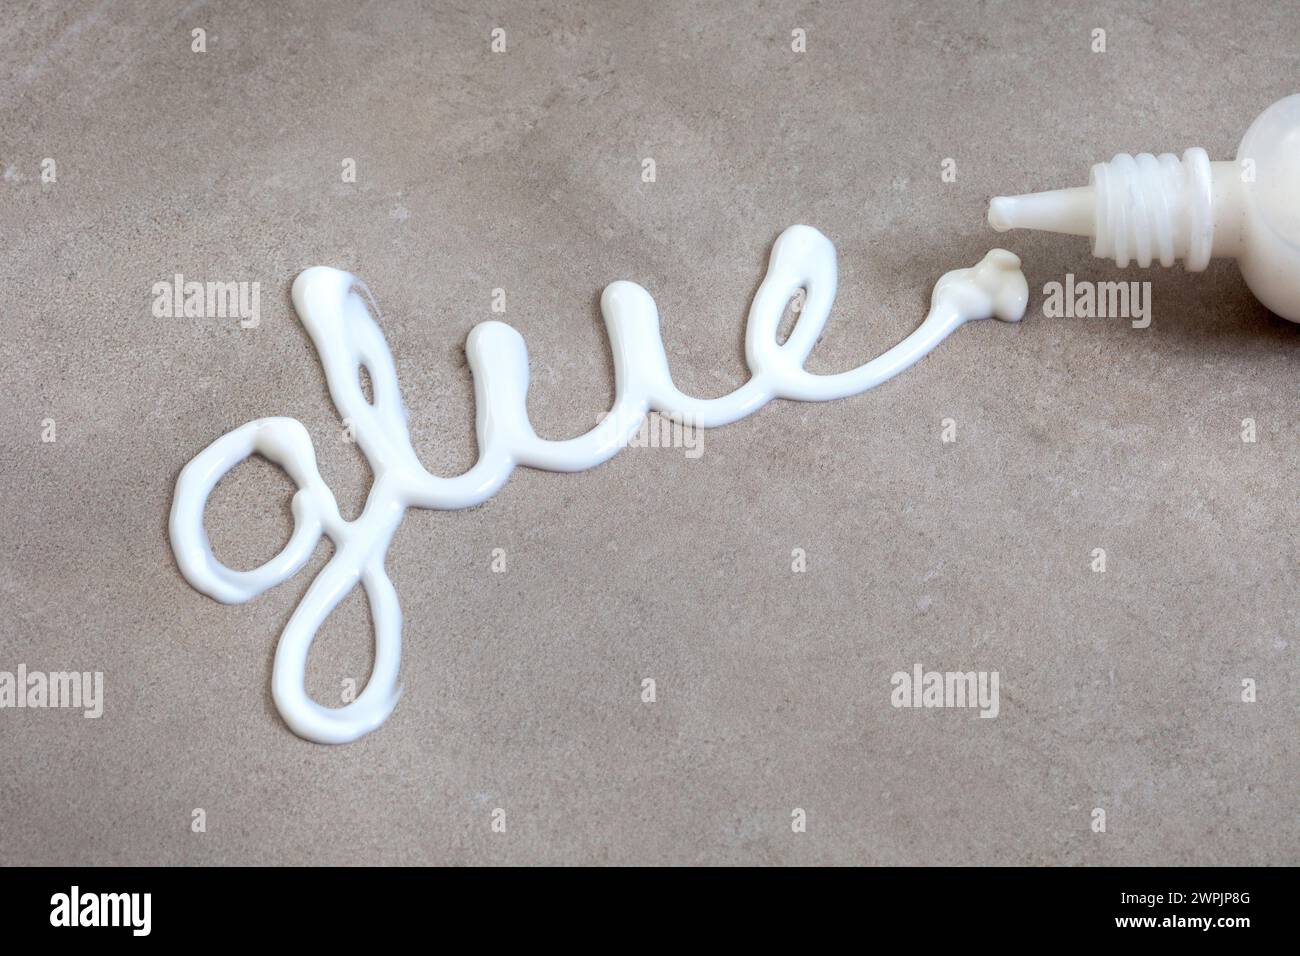 The word glue written with white wood glue on a mottled grey surface with copy space Stock Photo